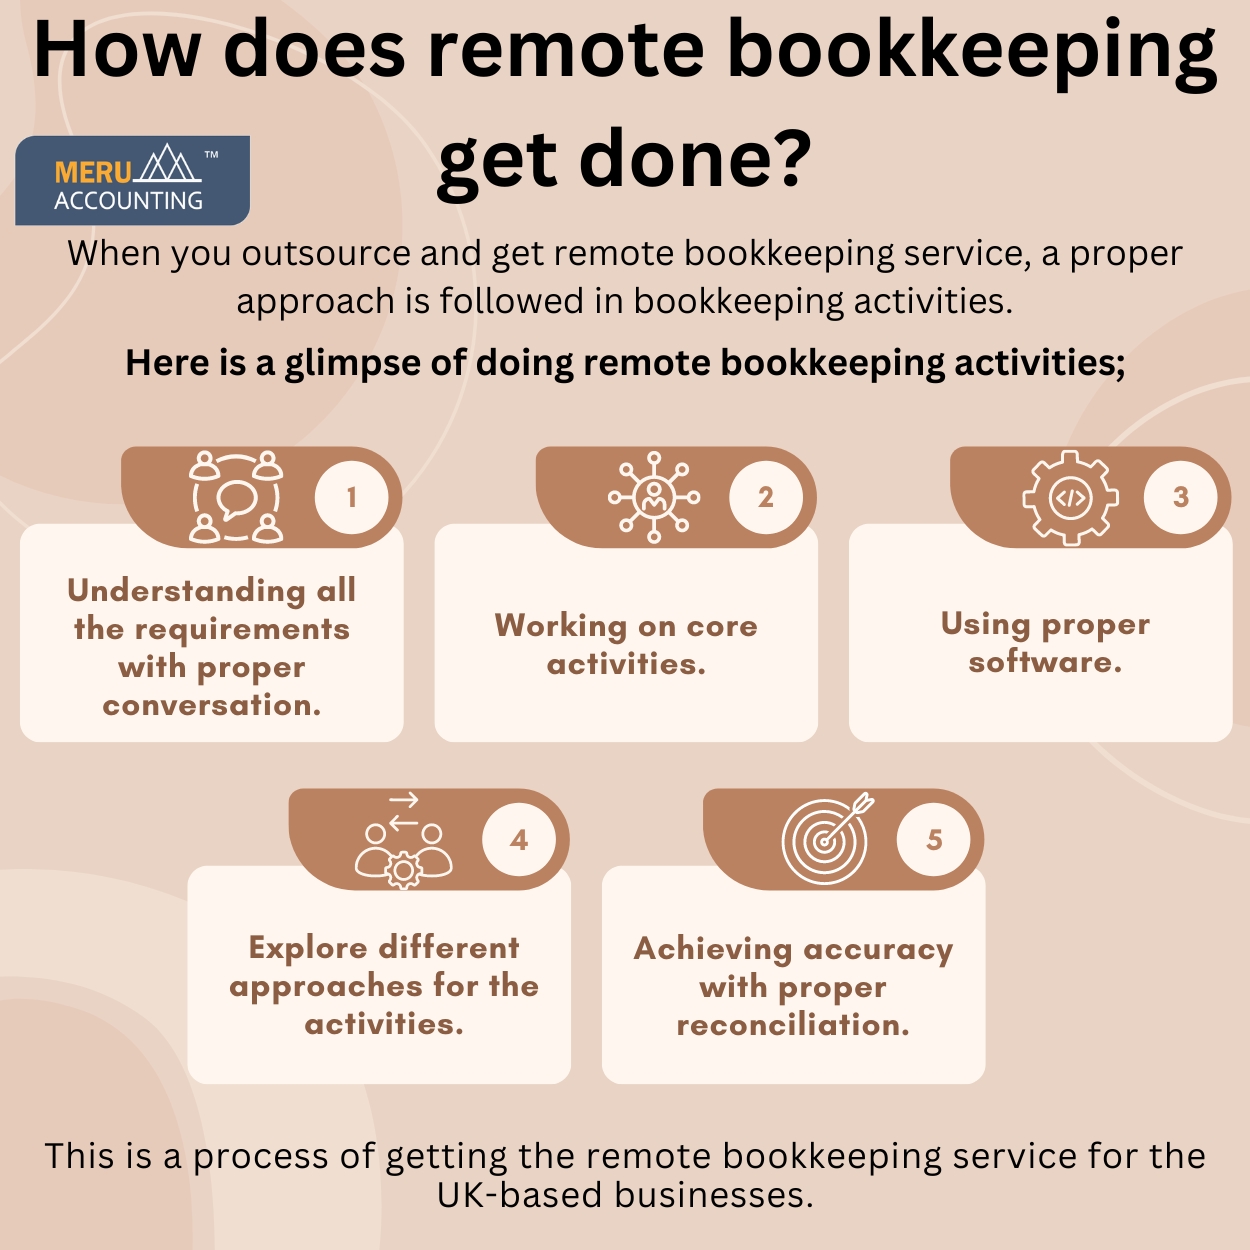 How does remote bookkeeping get done size 1250 by 1250 v1 1